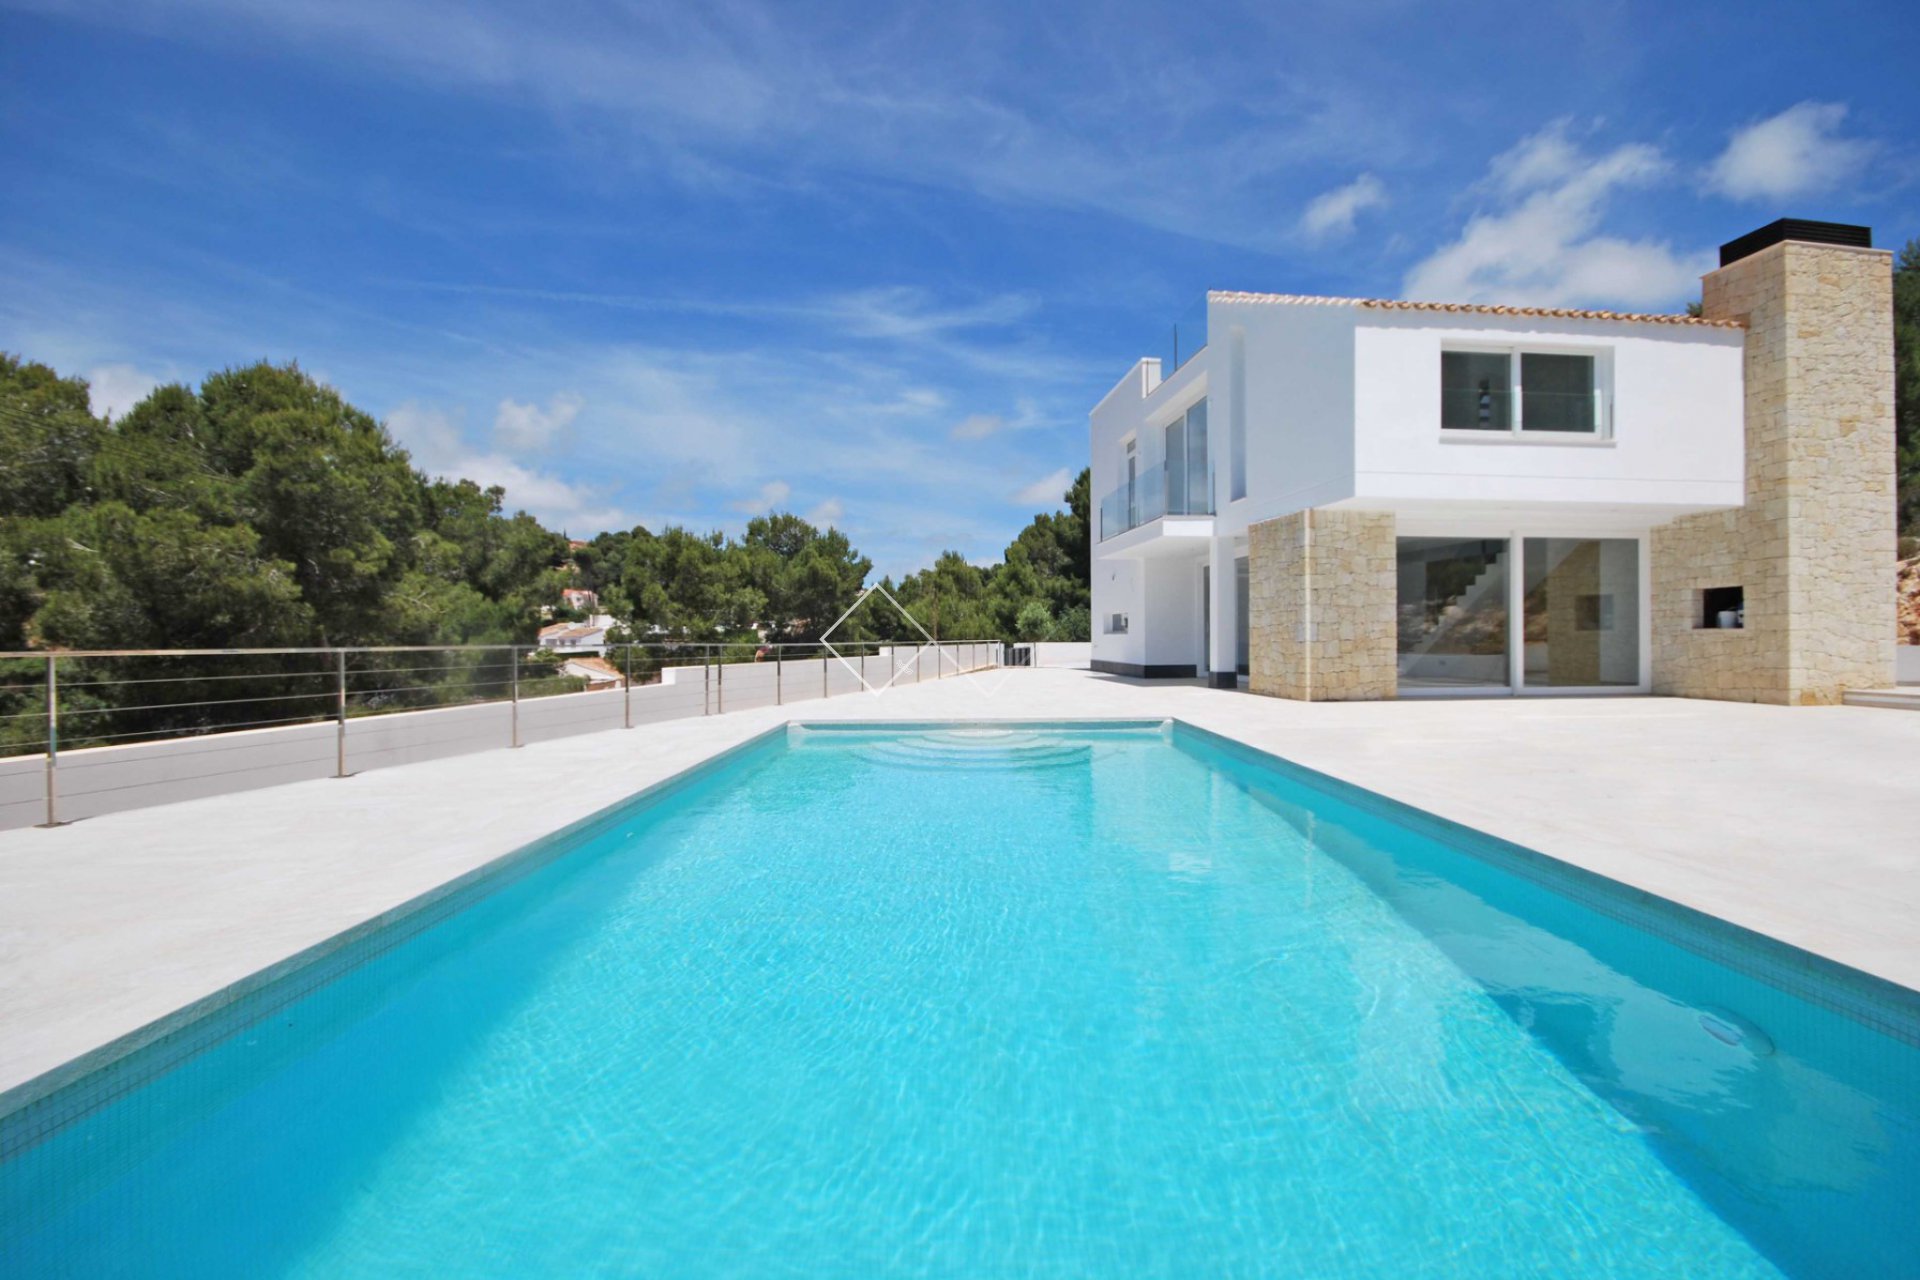 pool - New construction Moraira, close to beach and amenities